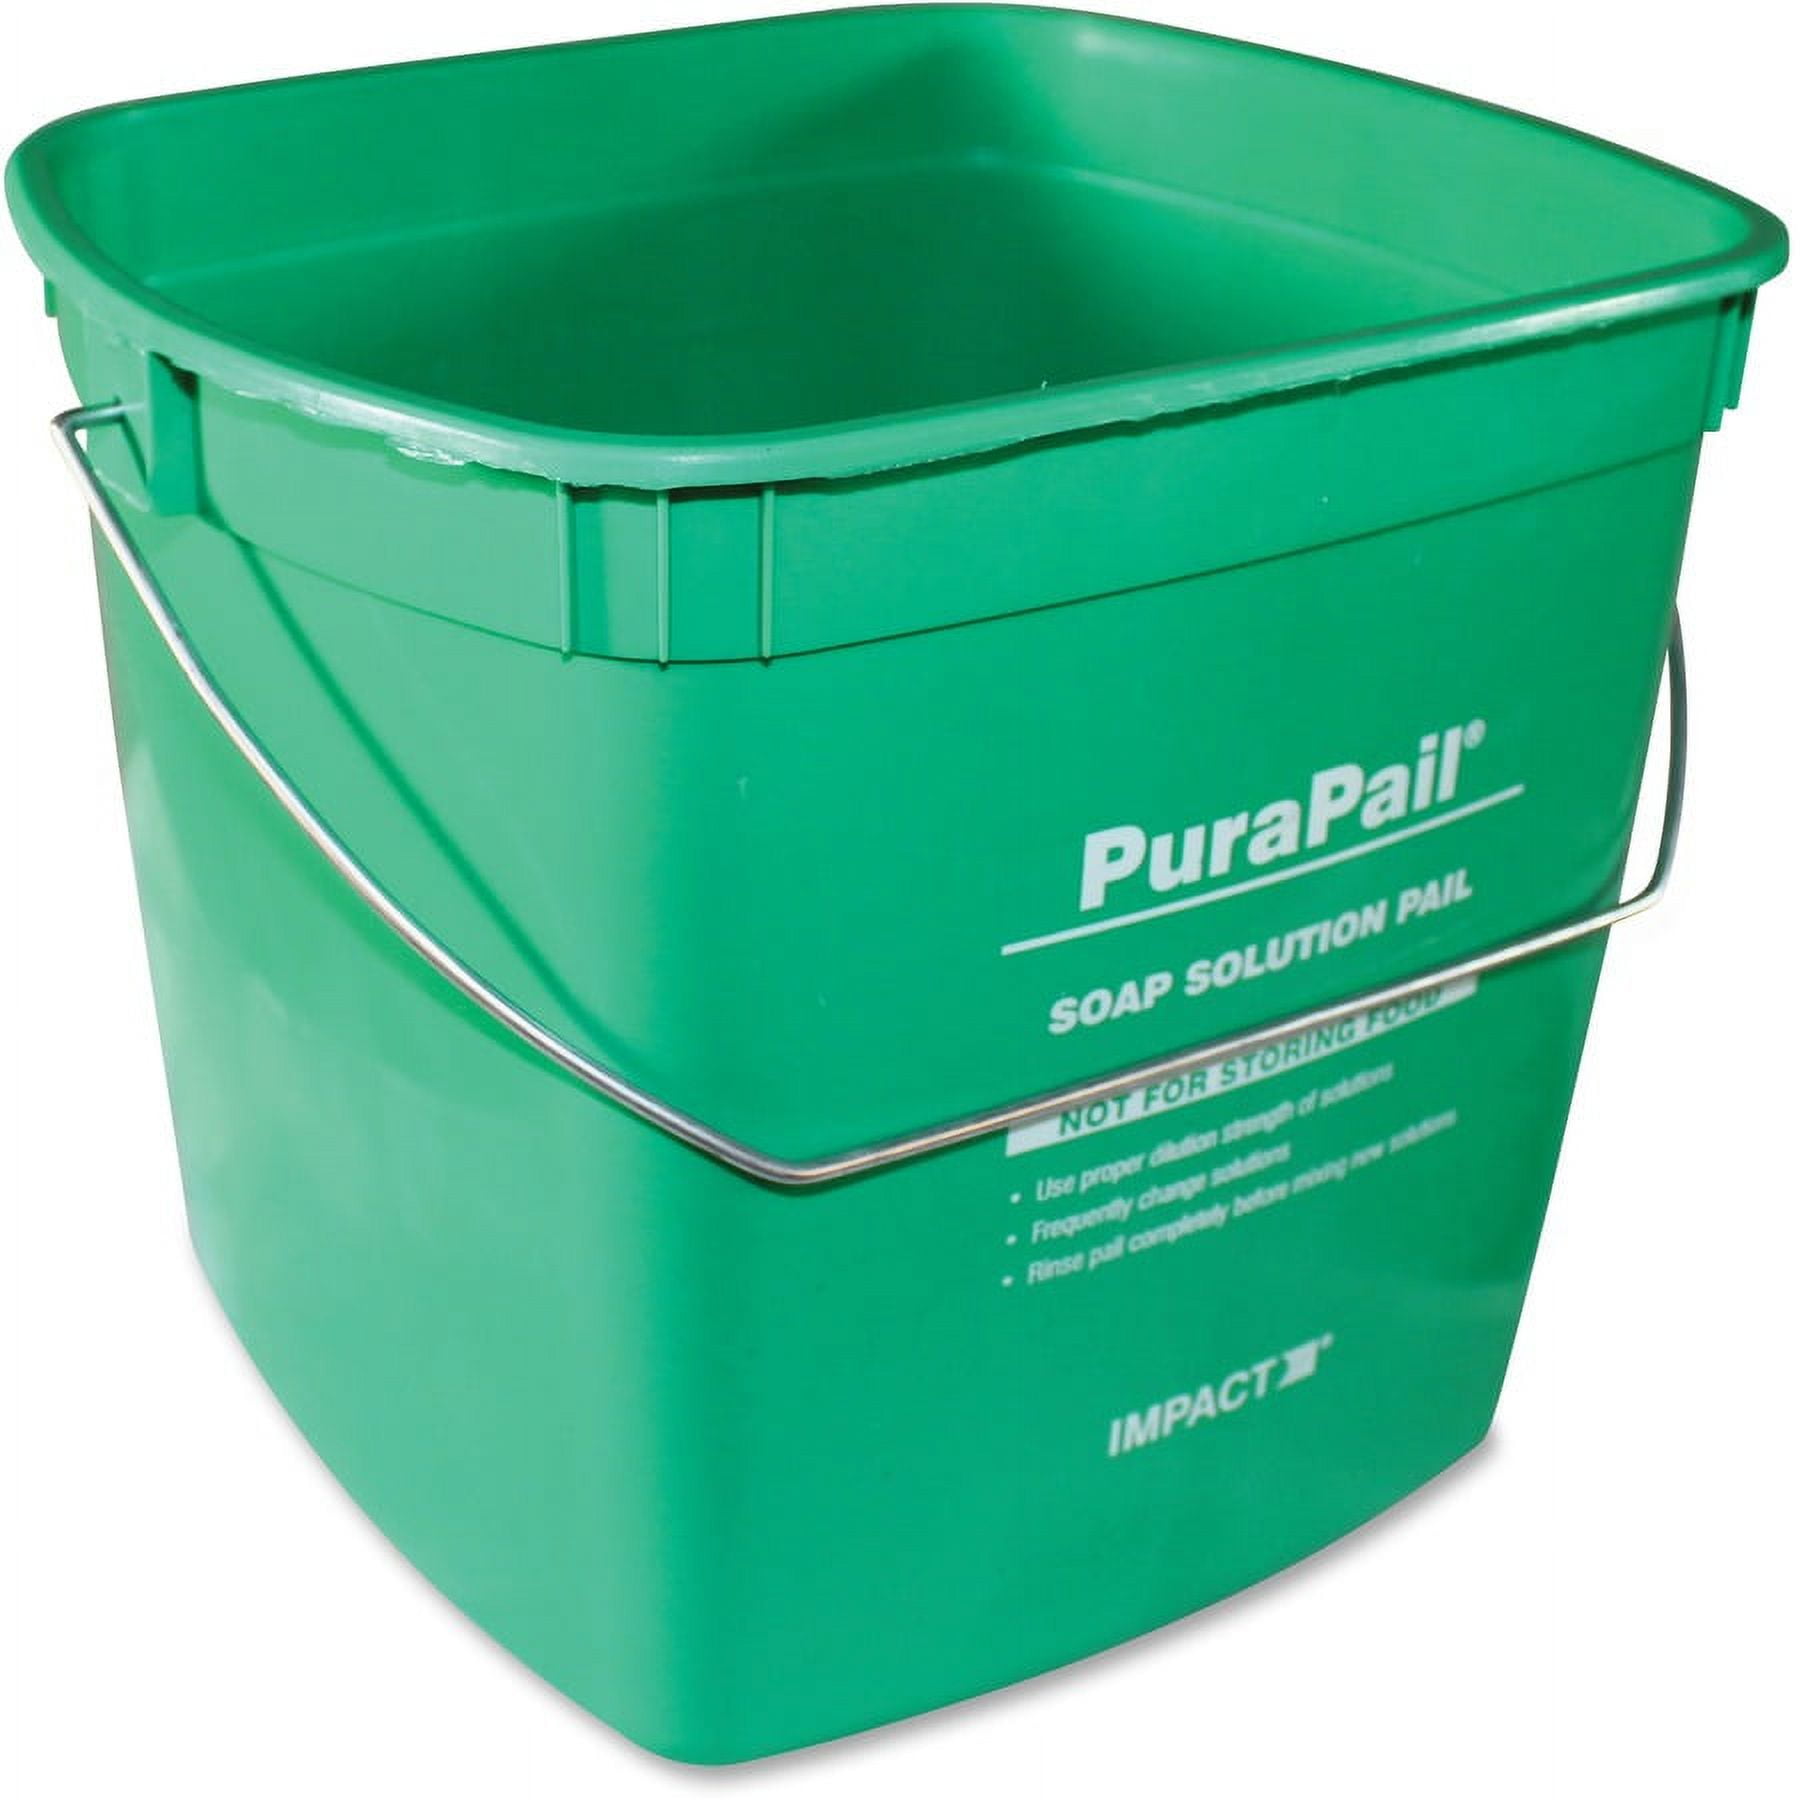 RW Clean 6 Qt Square Green Plastic Cleaning Bucket - with Plastic Handle -  8 1/2 x 8 1/2 x 7 1/4 - 1 count box